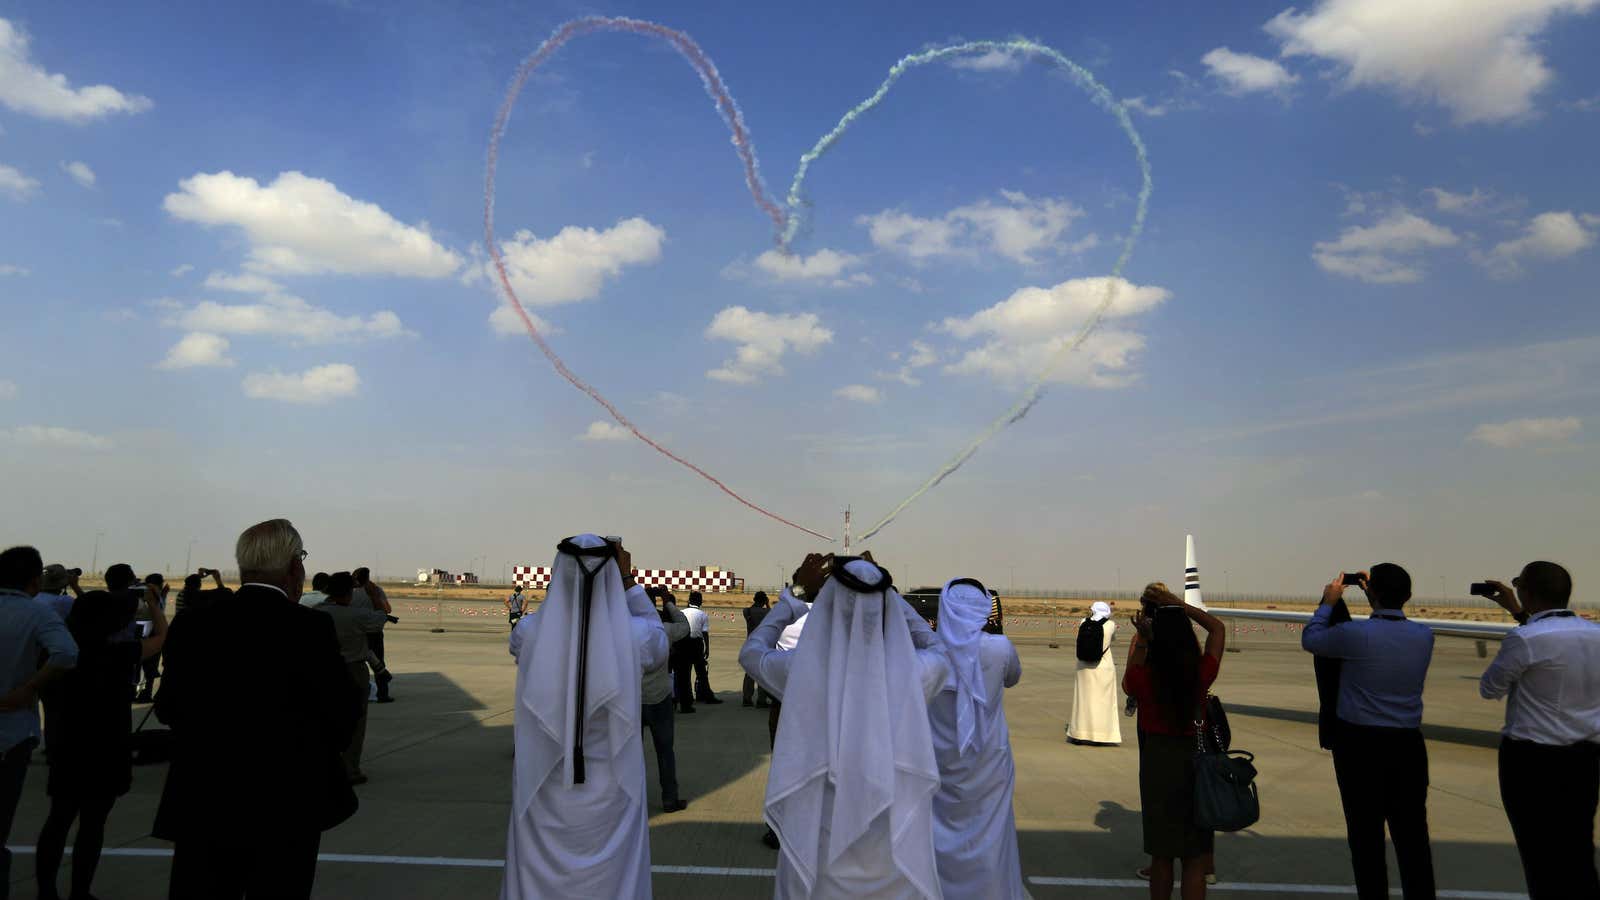 UAE officials hope the world will fall in love with Dubai.